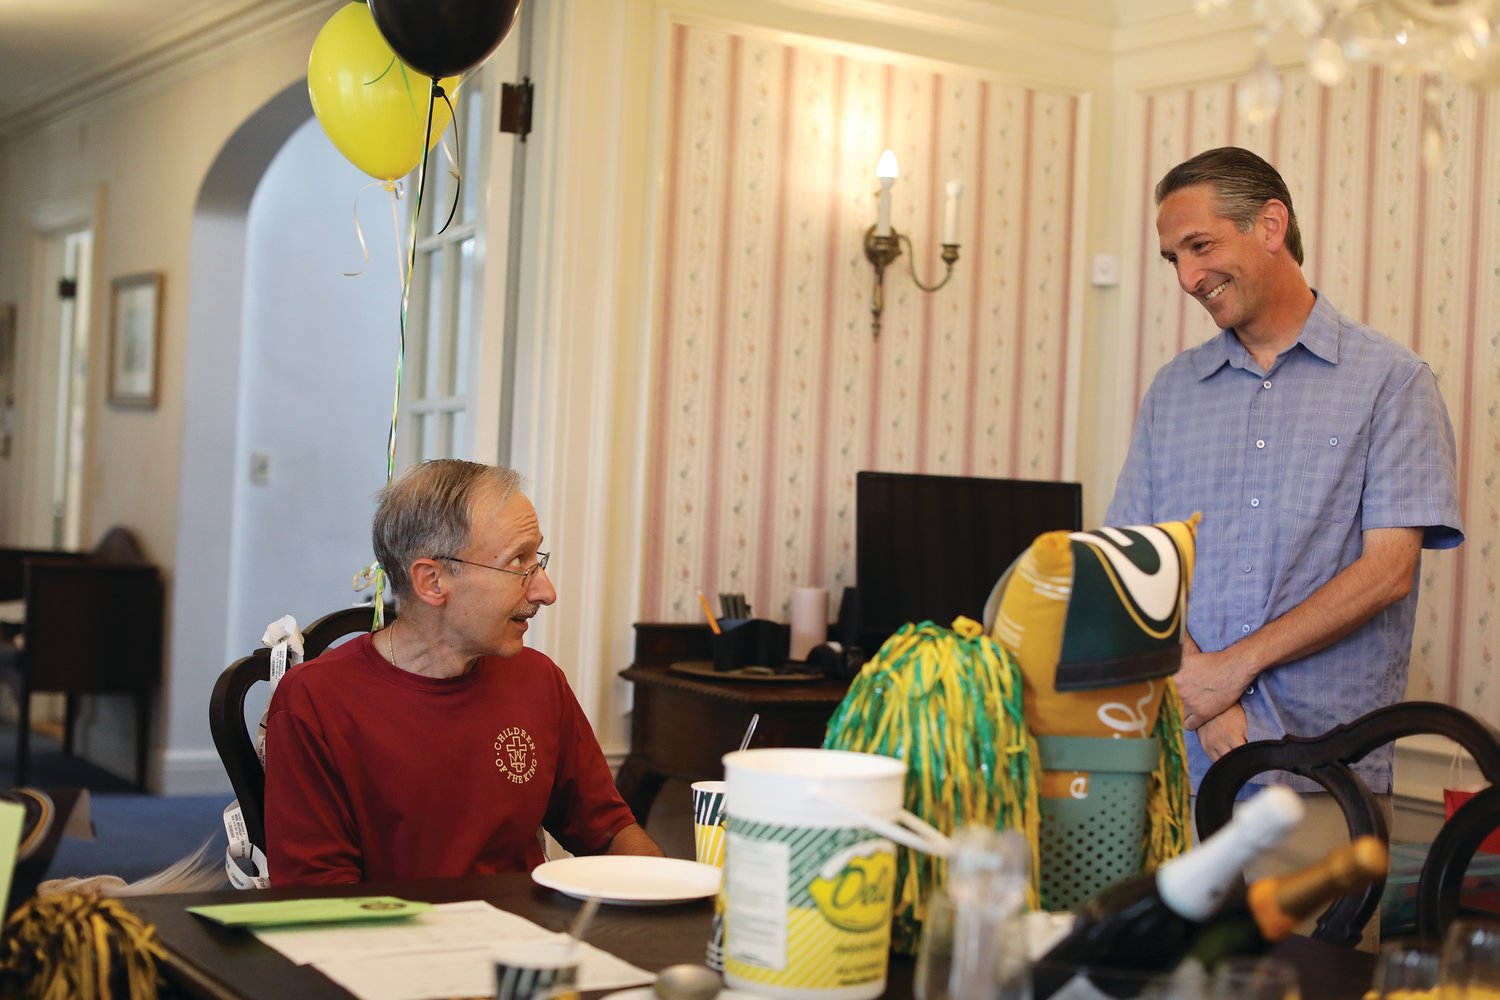 Surrounded by loved ones, Father Raymond Suriani celebrates the end of his cancer treatment.